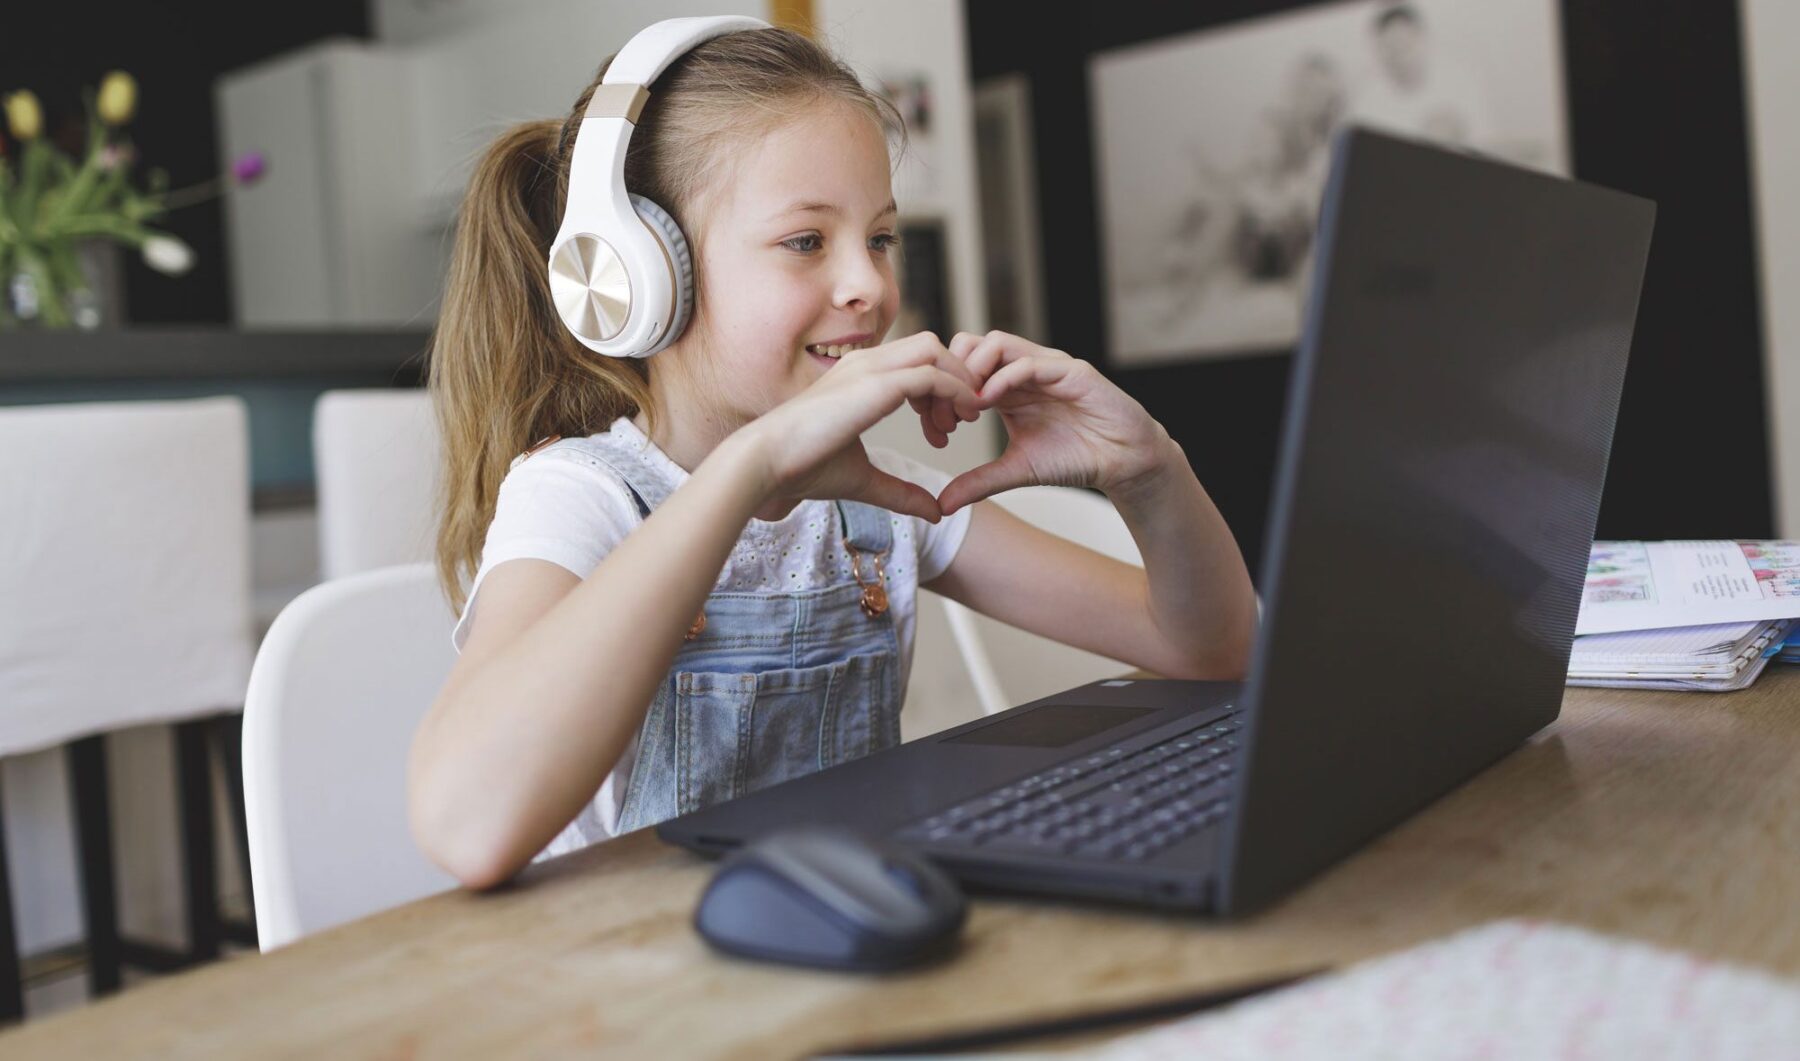 young girl wearing headset attending online classes.